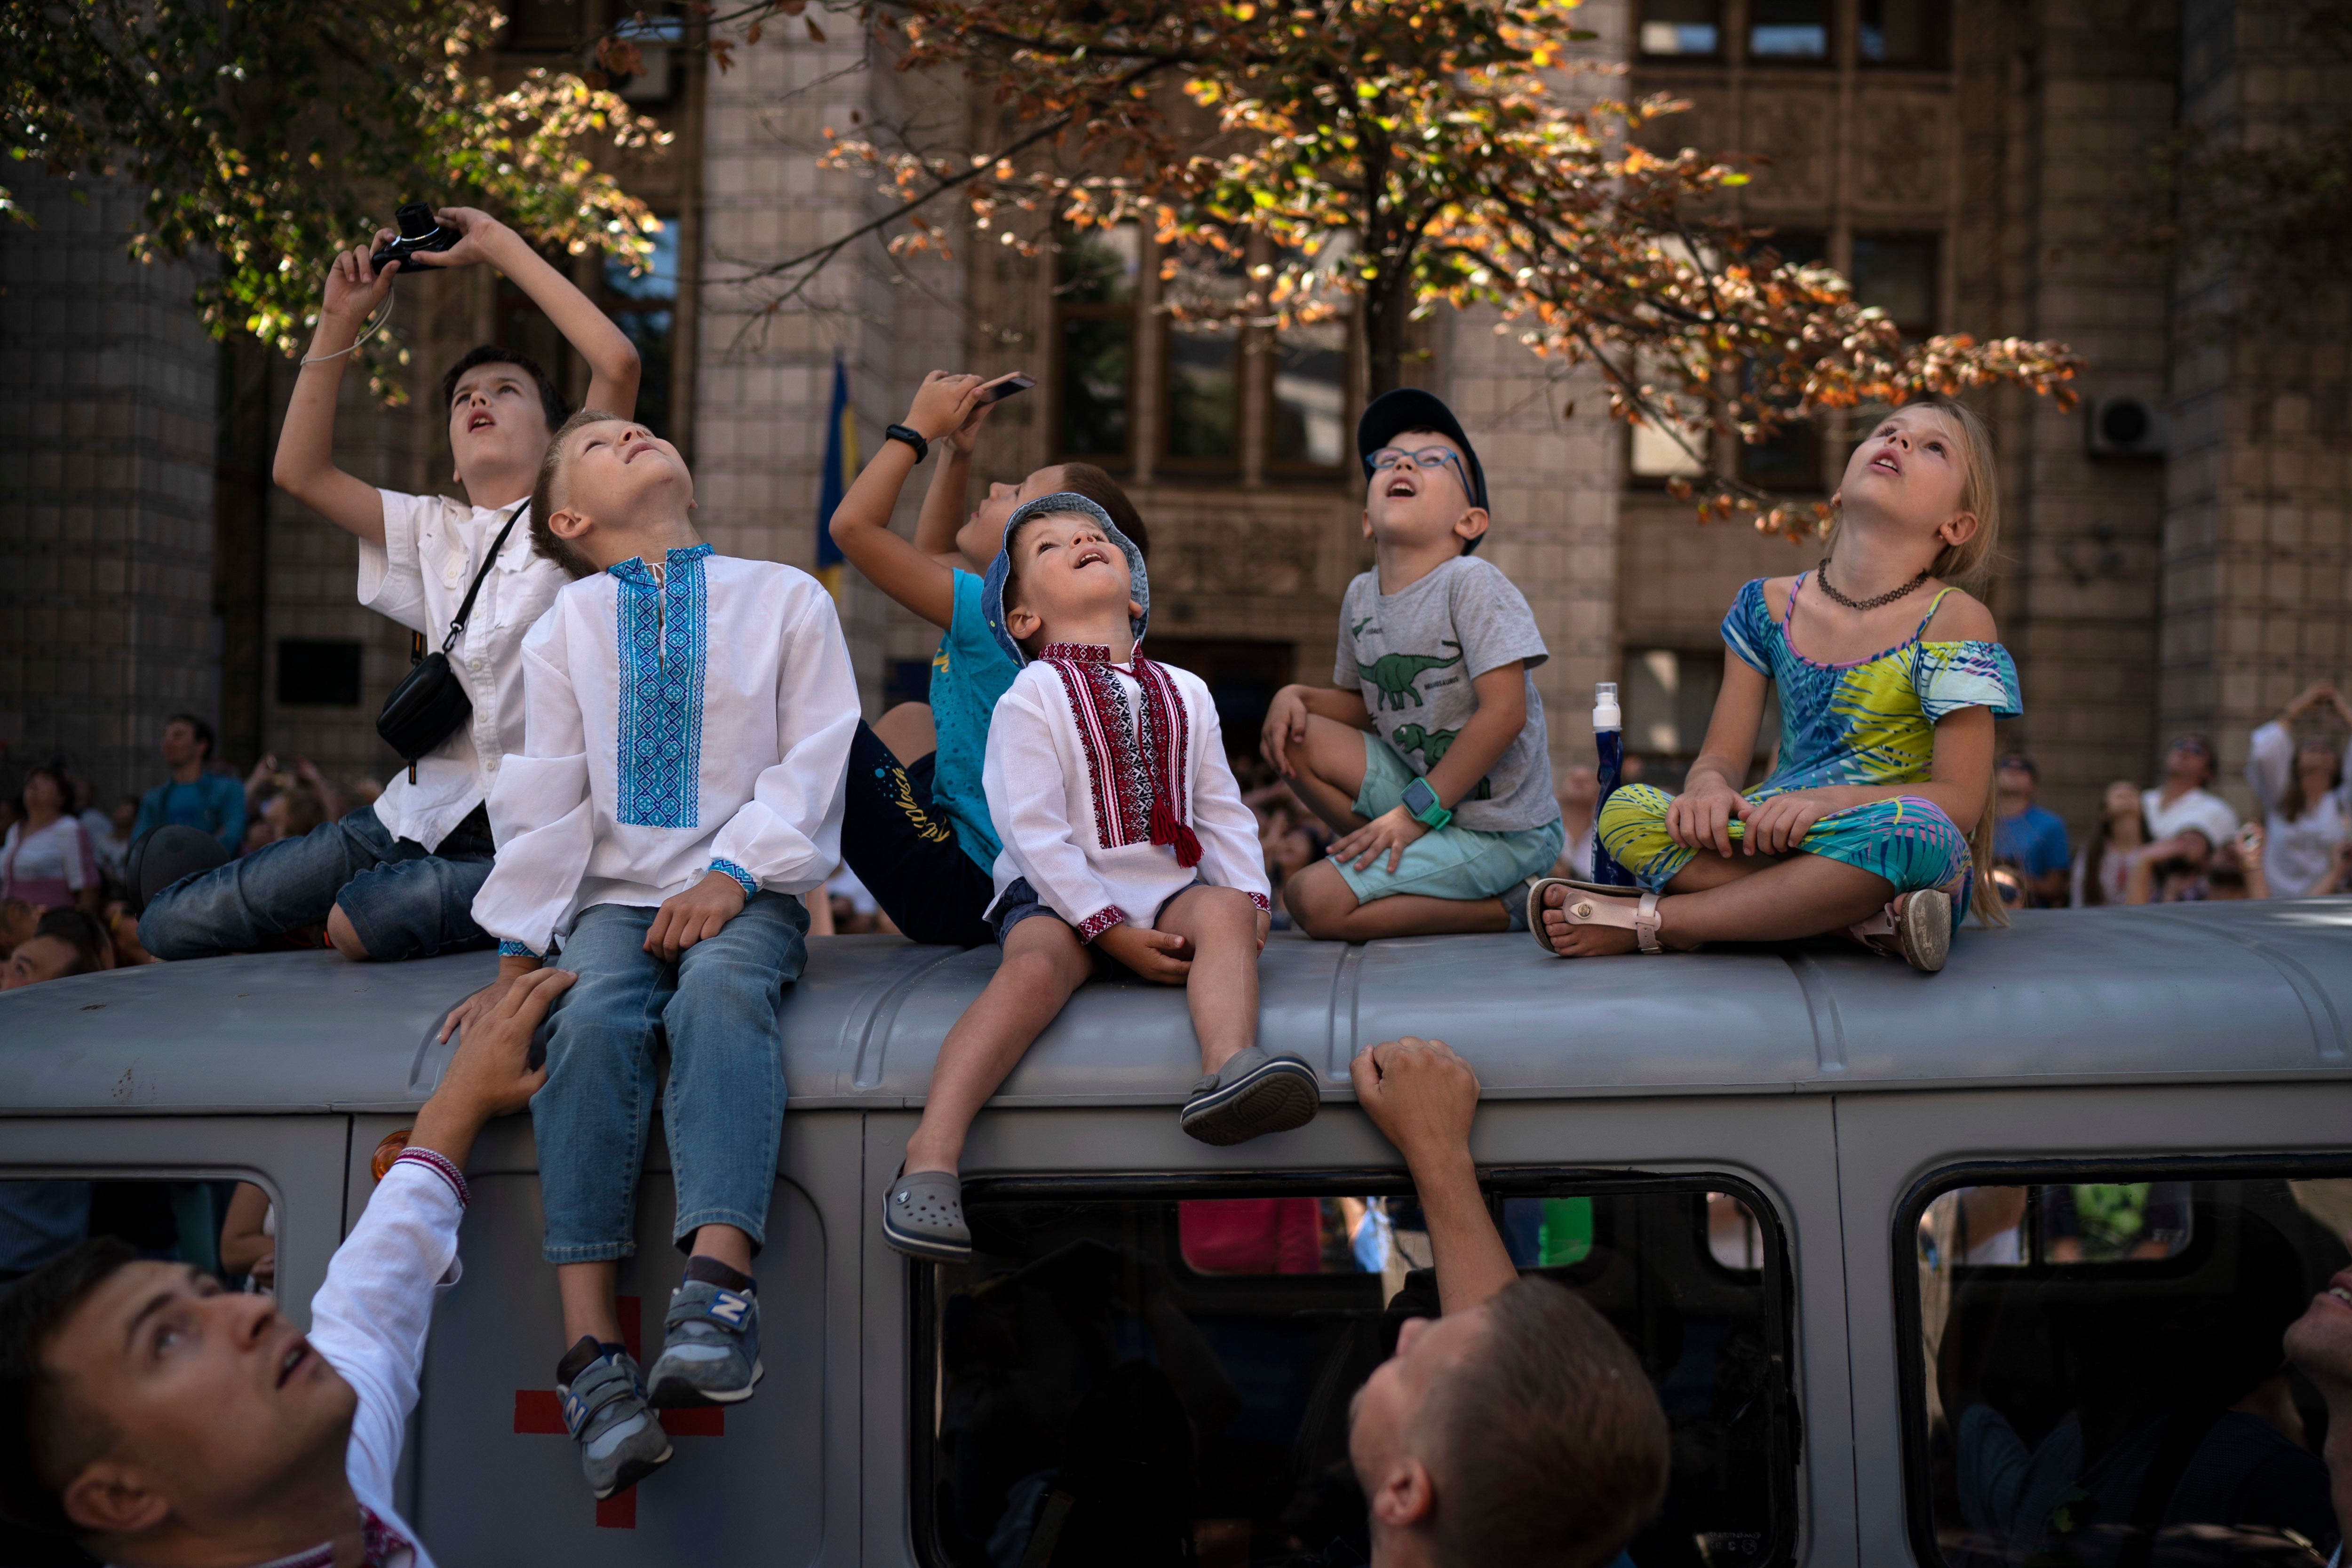 Children look up as military aircrafts fly above the city center during a military parade to celebrate Independence Day in Kiev, Ukraine.